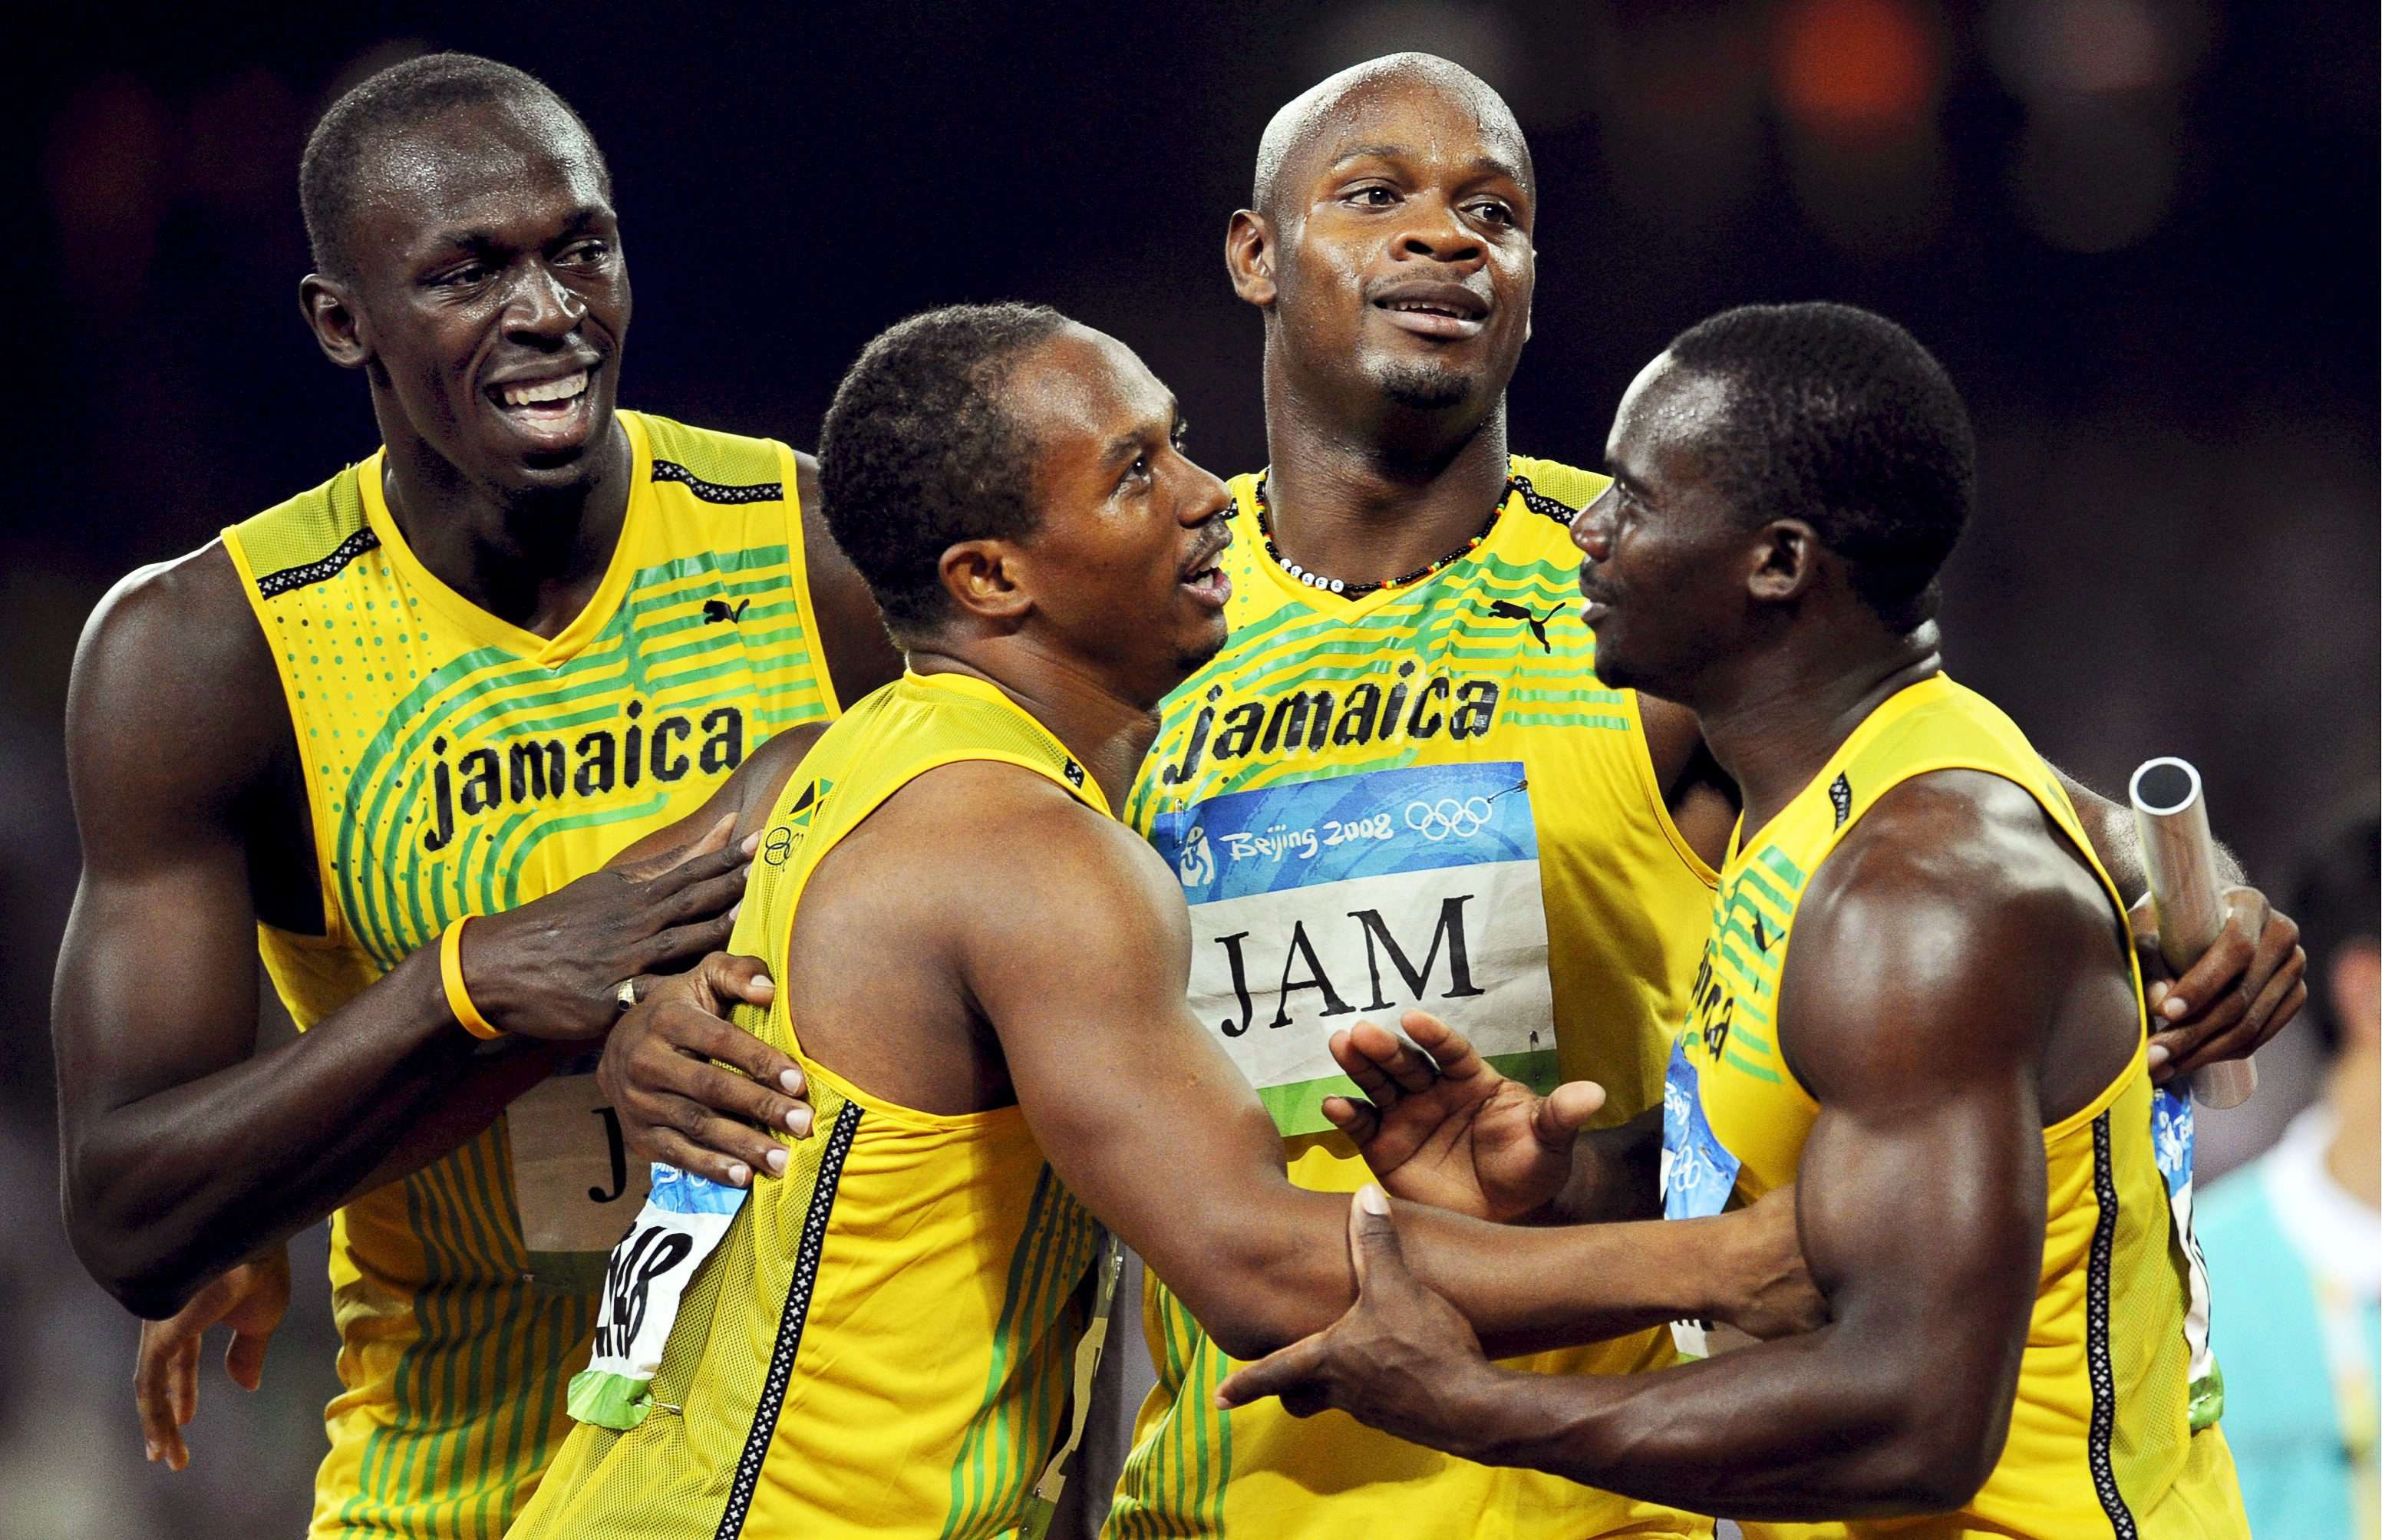 Usain Bolt (left), Michael Frater, Asafa Powell and Nesta Carter celebrating after winning the 4x100m relay final at the Beijing 2008 Olympic Games. Photo: EPA